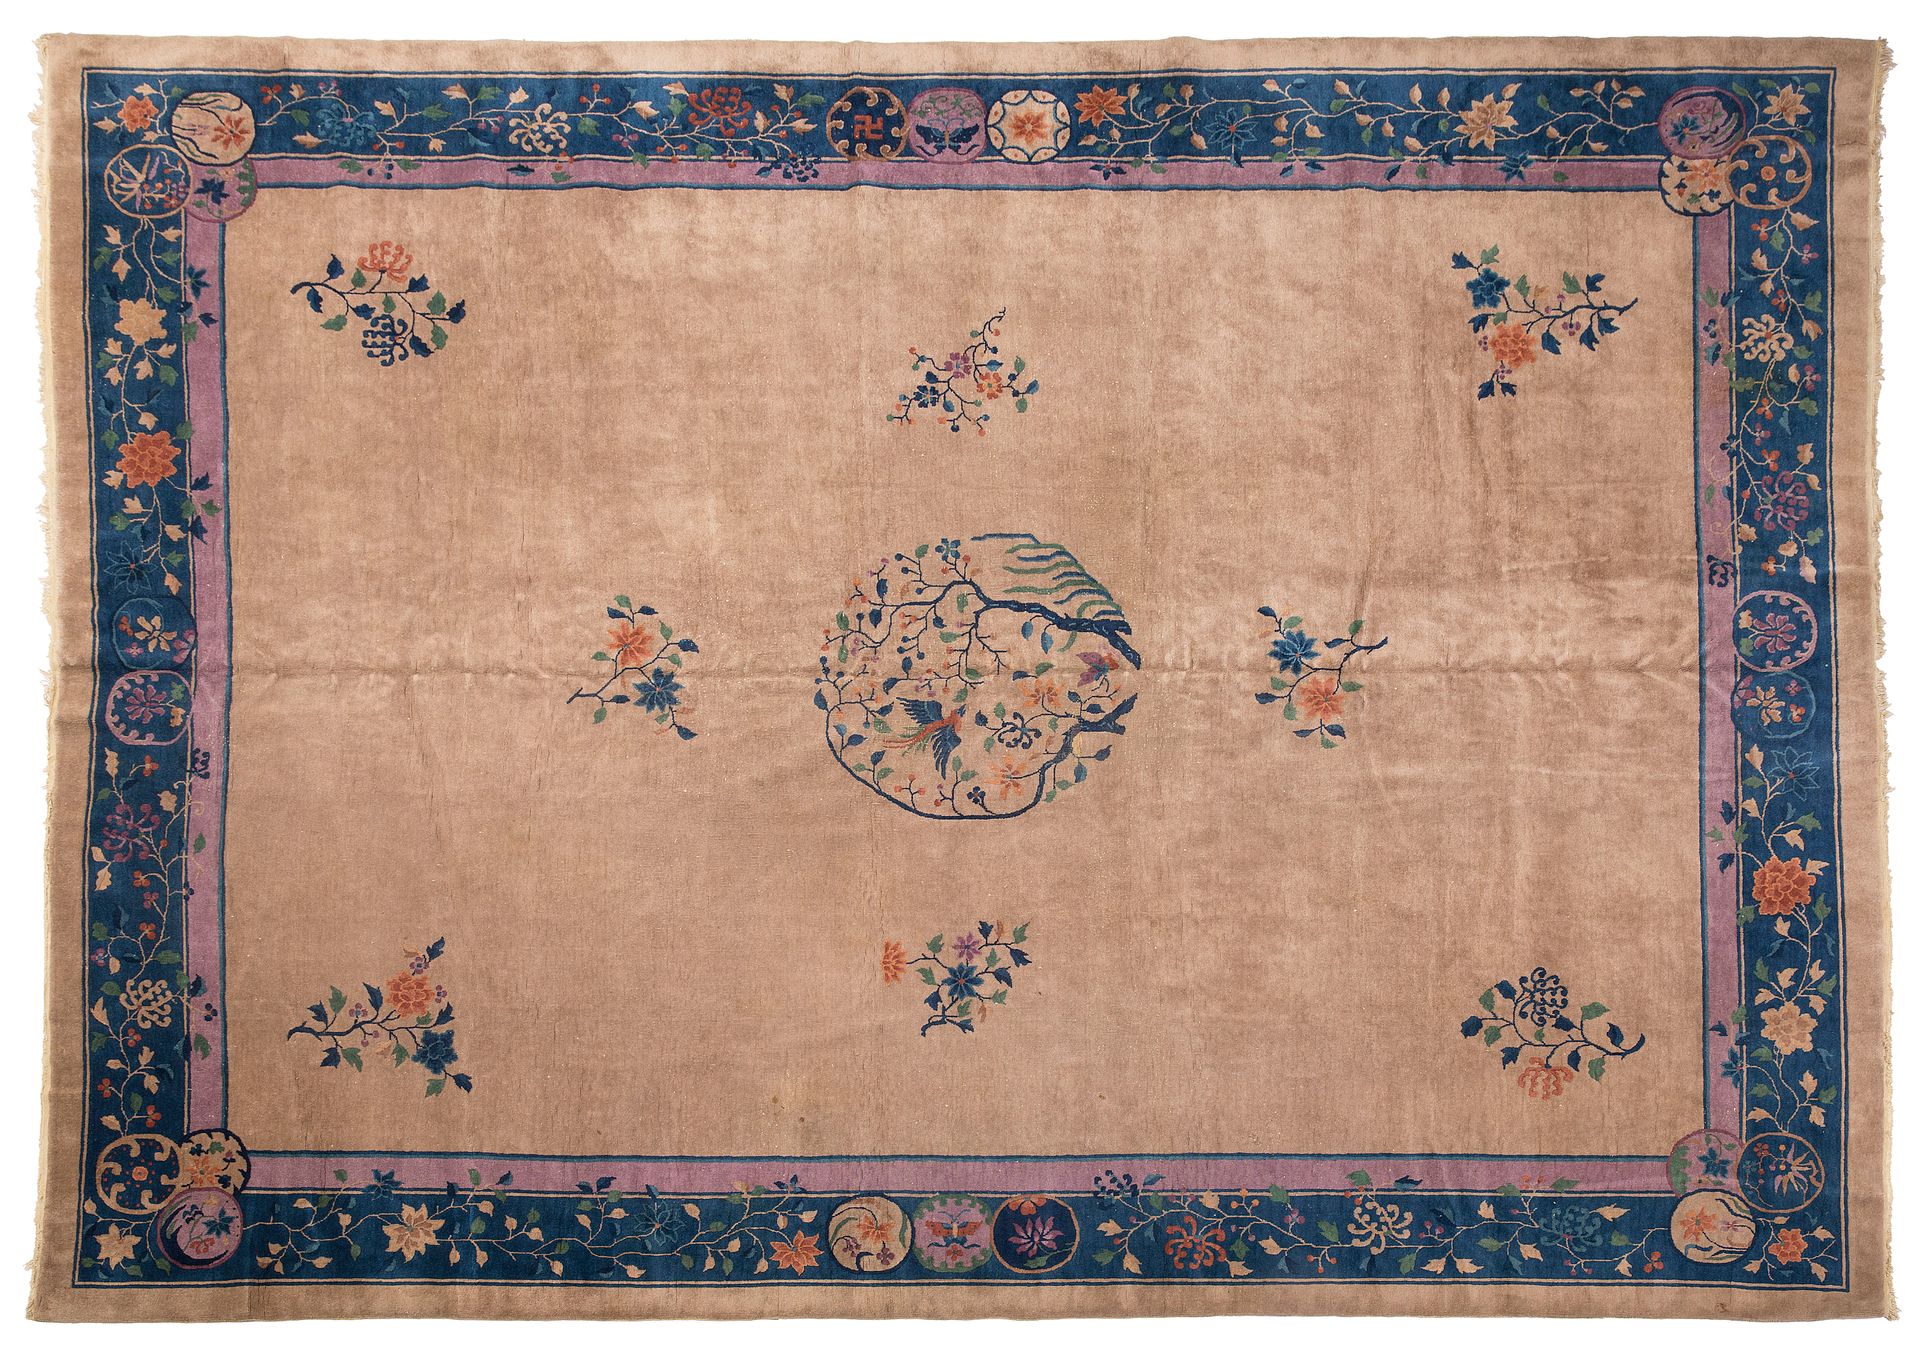 Null INDOCHINA carpet (Indochina), mid 20th century

Dimensions : 455 x 365cm.

&hellip;